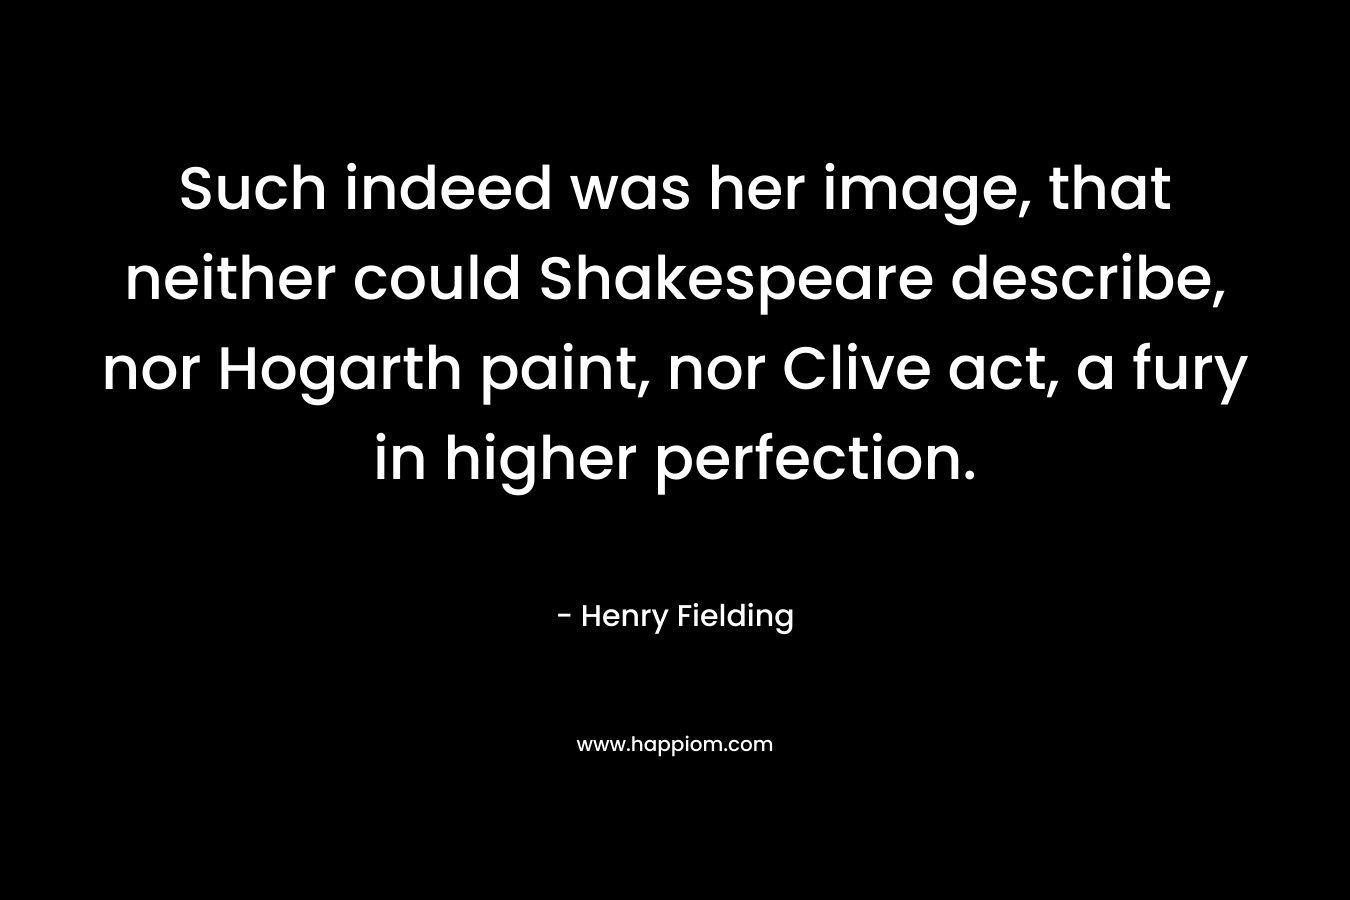 Such indeed was her image, that neither could Shakespeare describe, nor Hogarth paint, nor Clive act, a fury in higher perfection.